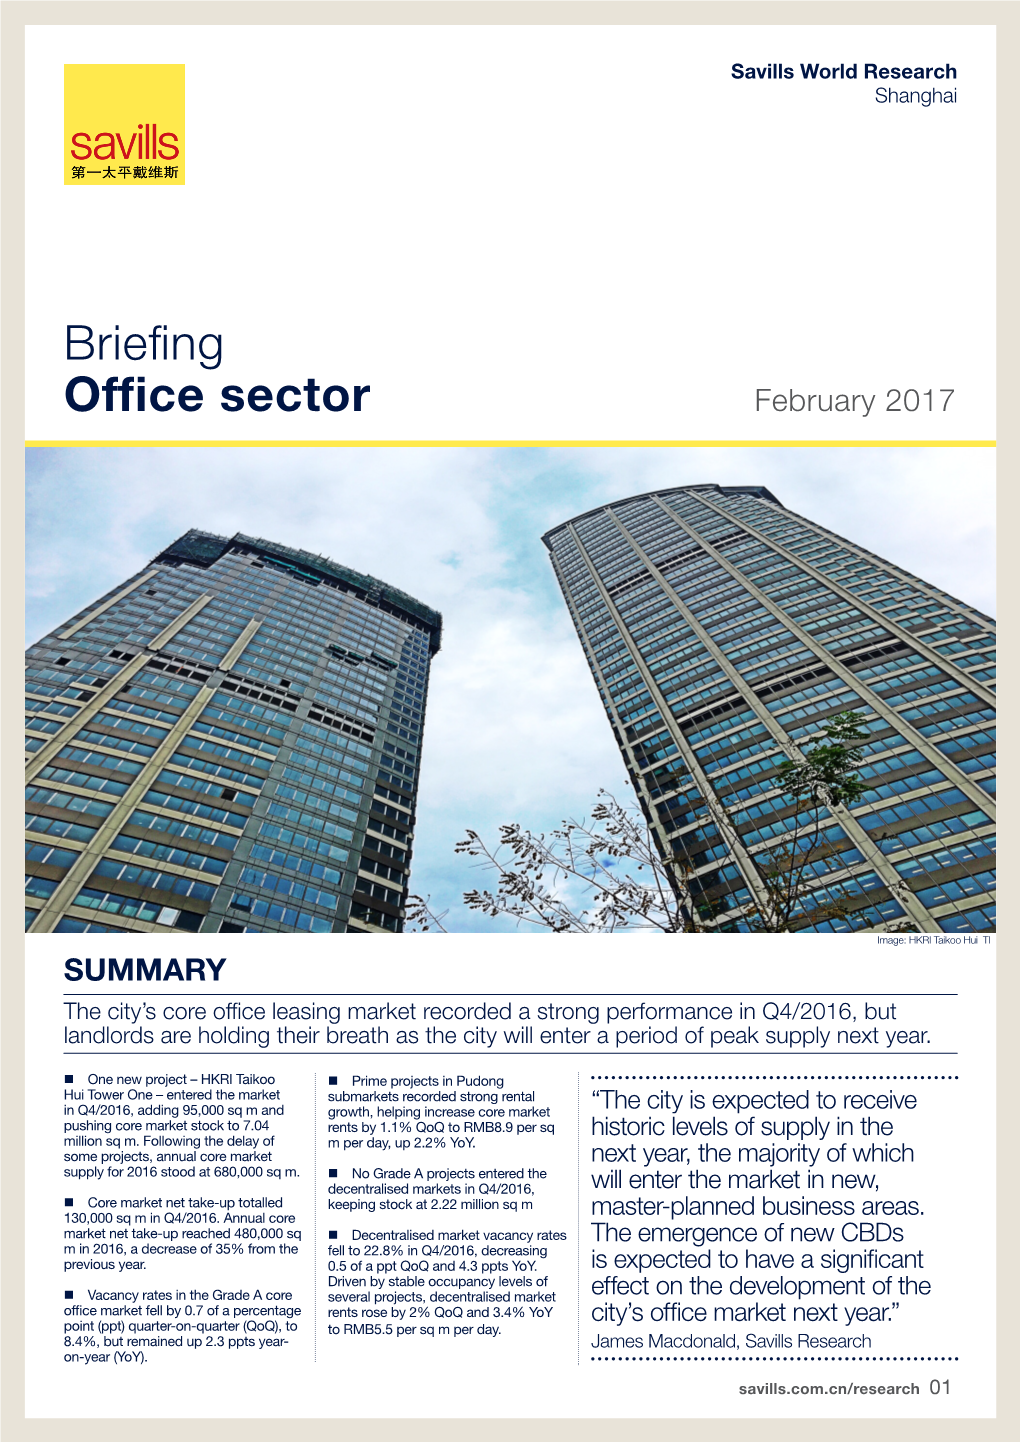 Briefing Office Sector February 2017